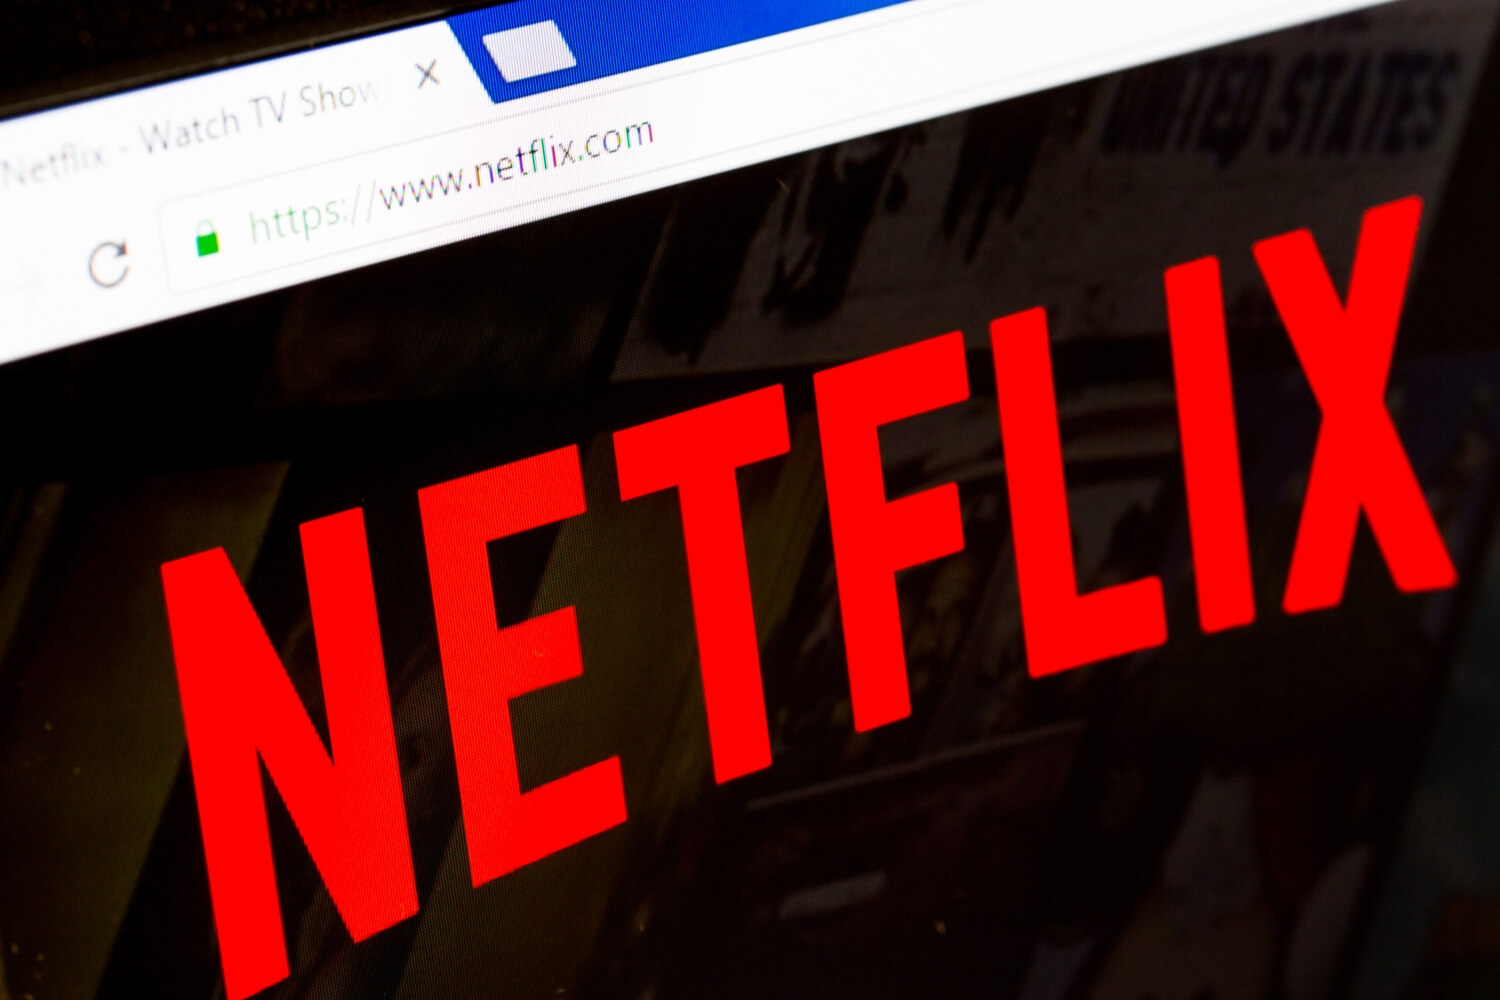 Netflix's unique approach means new content is secured through 2020 and beyond